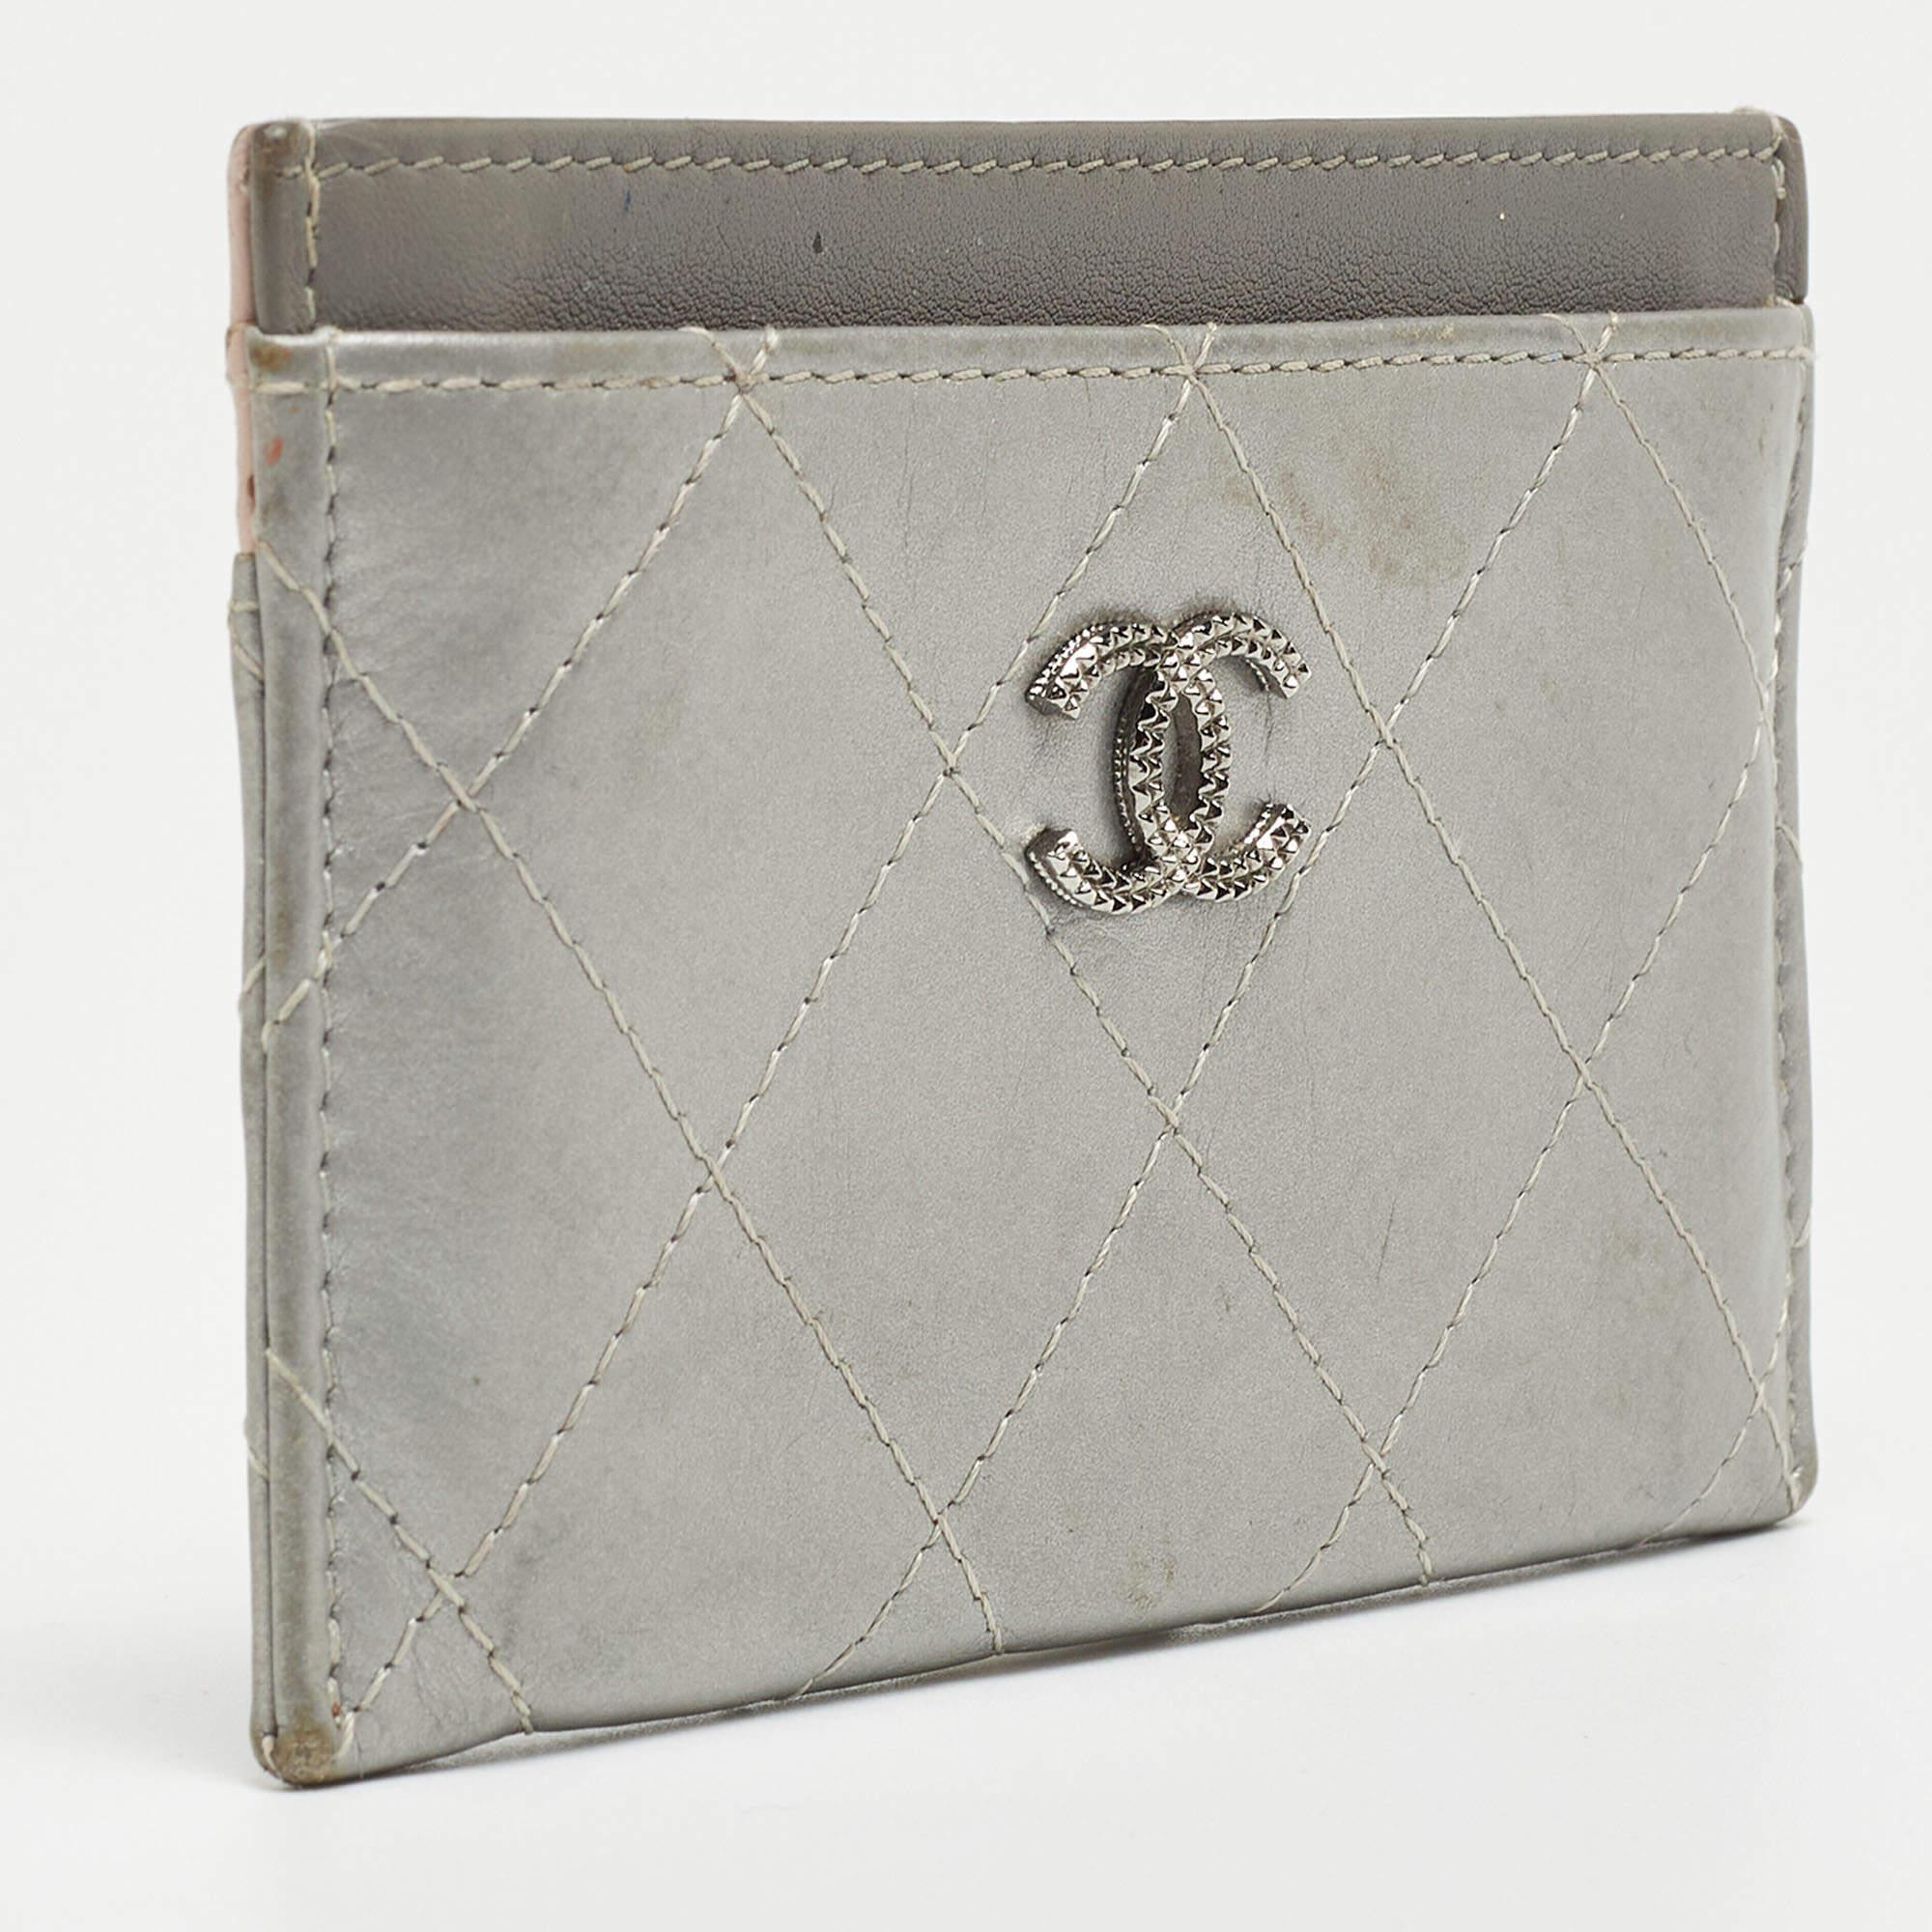 Conveniently designed for everyday use, this card holder is from Chanel. Crafted from quilted leather, the piece flaunts a classy hue and a crystal-embellished 'CC' motif on the front. The interior is leather and fabric lined.

